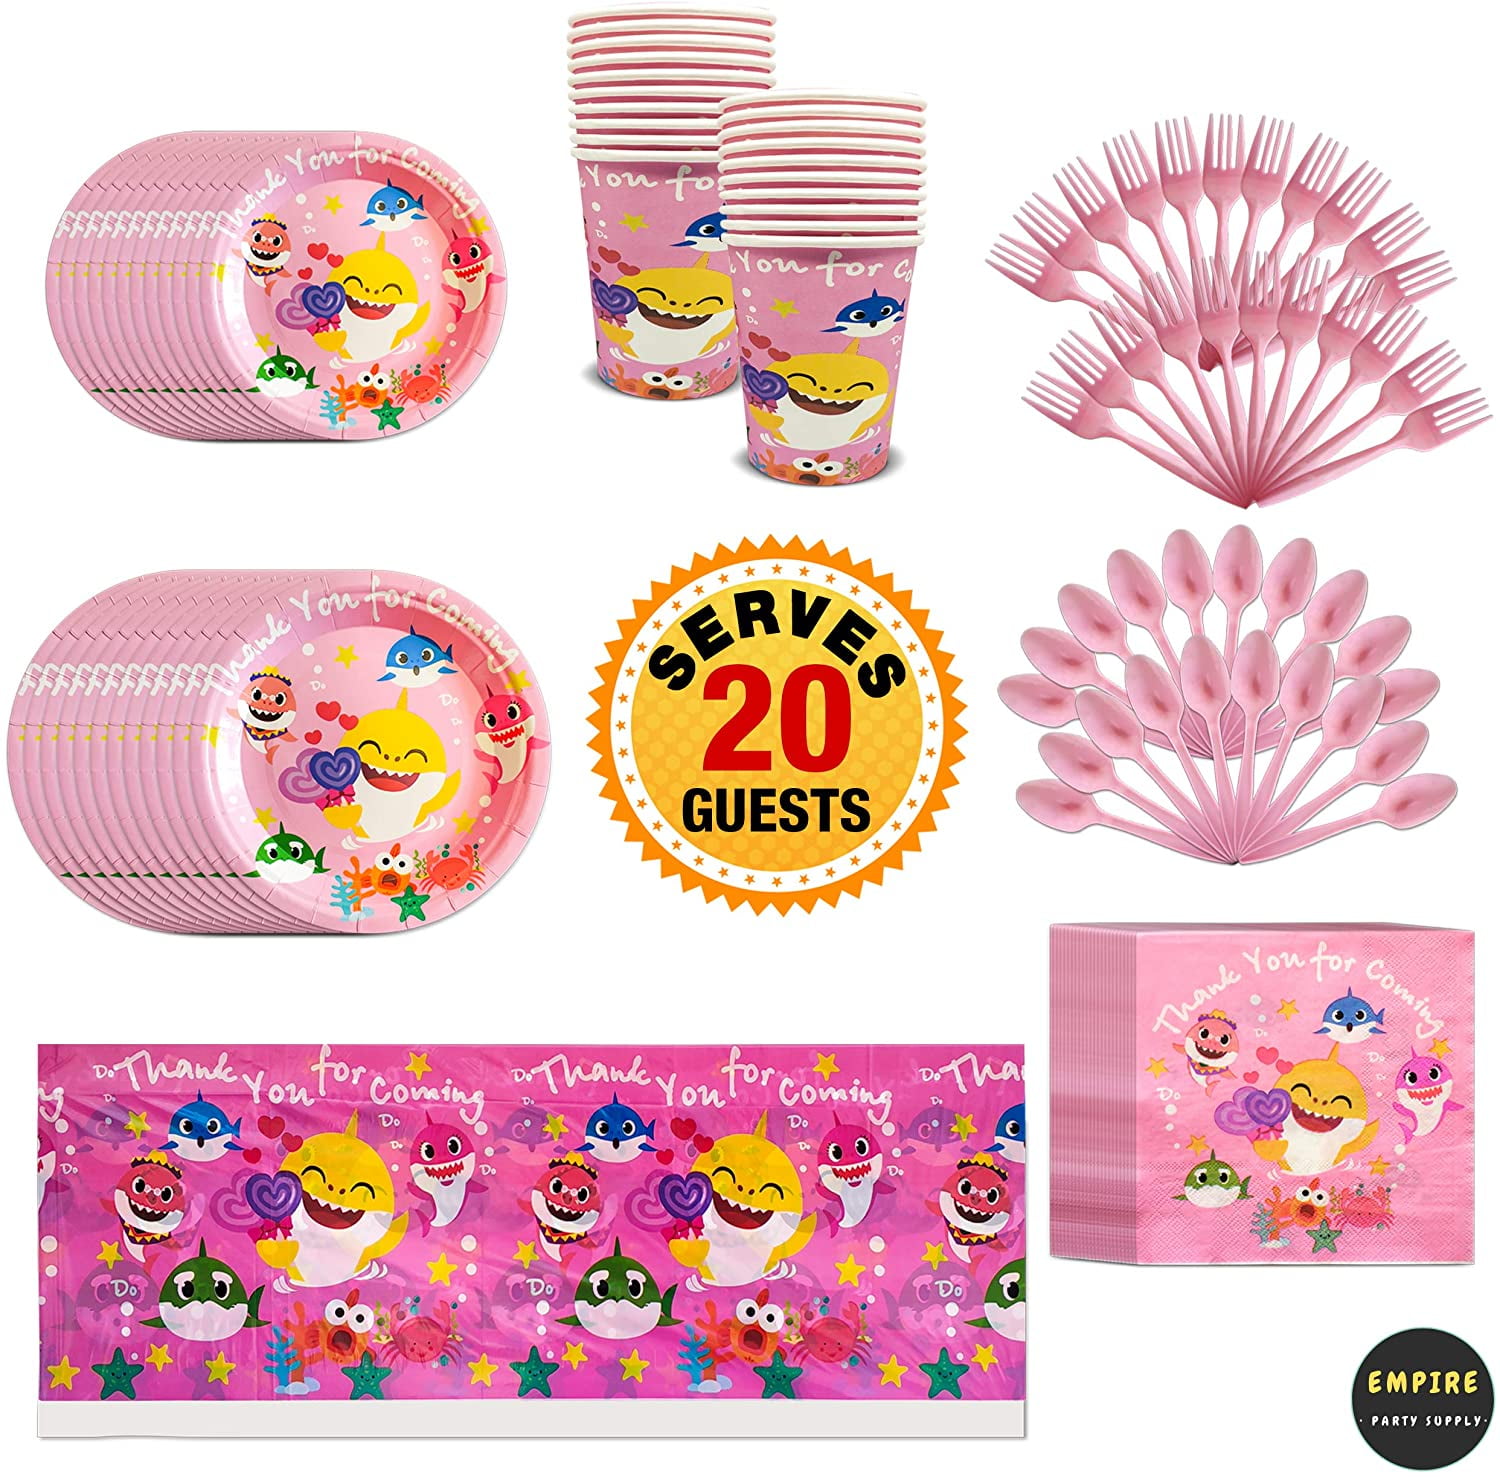 7 Inch Party Paper Plates,10 pcs Cups,20 Pcs Napkins Party Kit For Kids Birthday Carnival Party Supplies Decoration 50 Pcs Baby Cute Shark Pink Theme Party Supplies Set,Shark Party 20 Pcs 9 10 Guests 